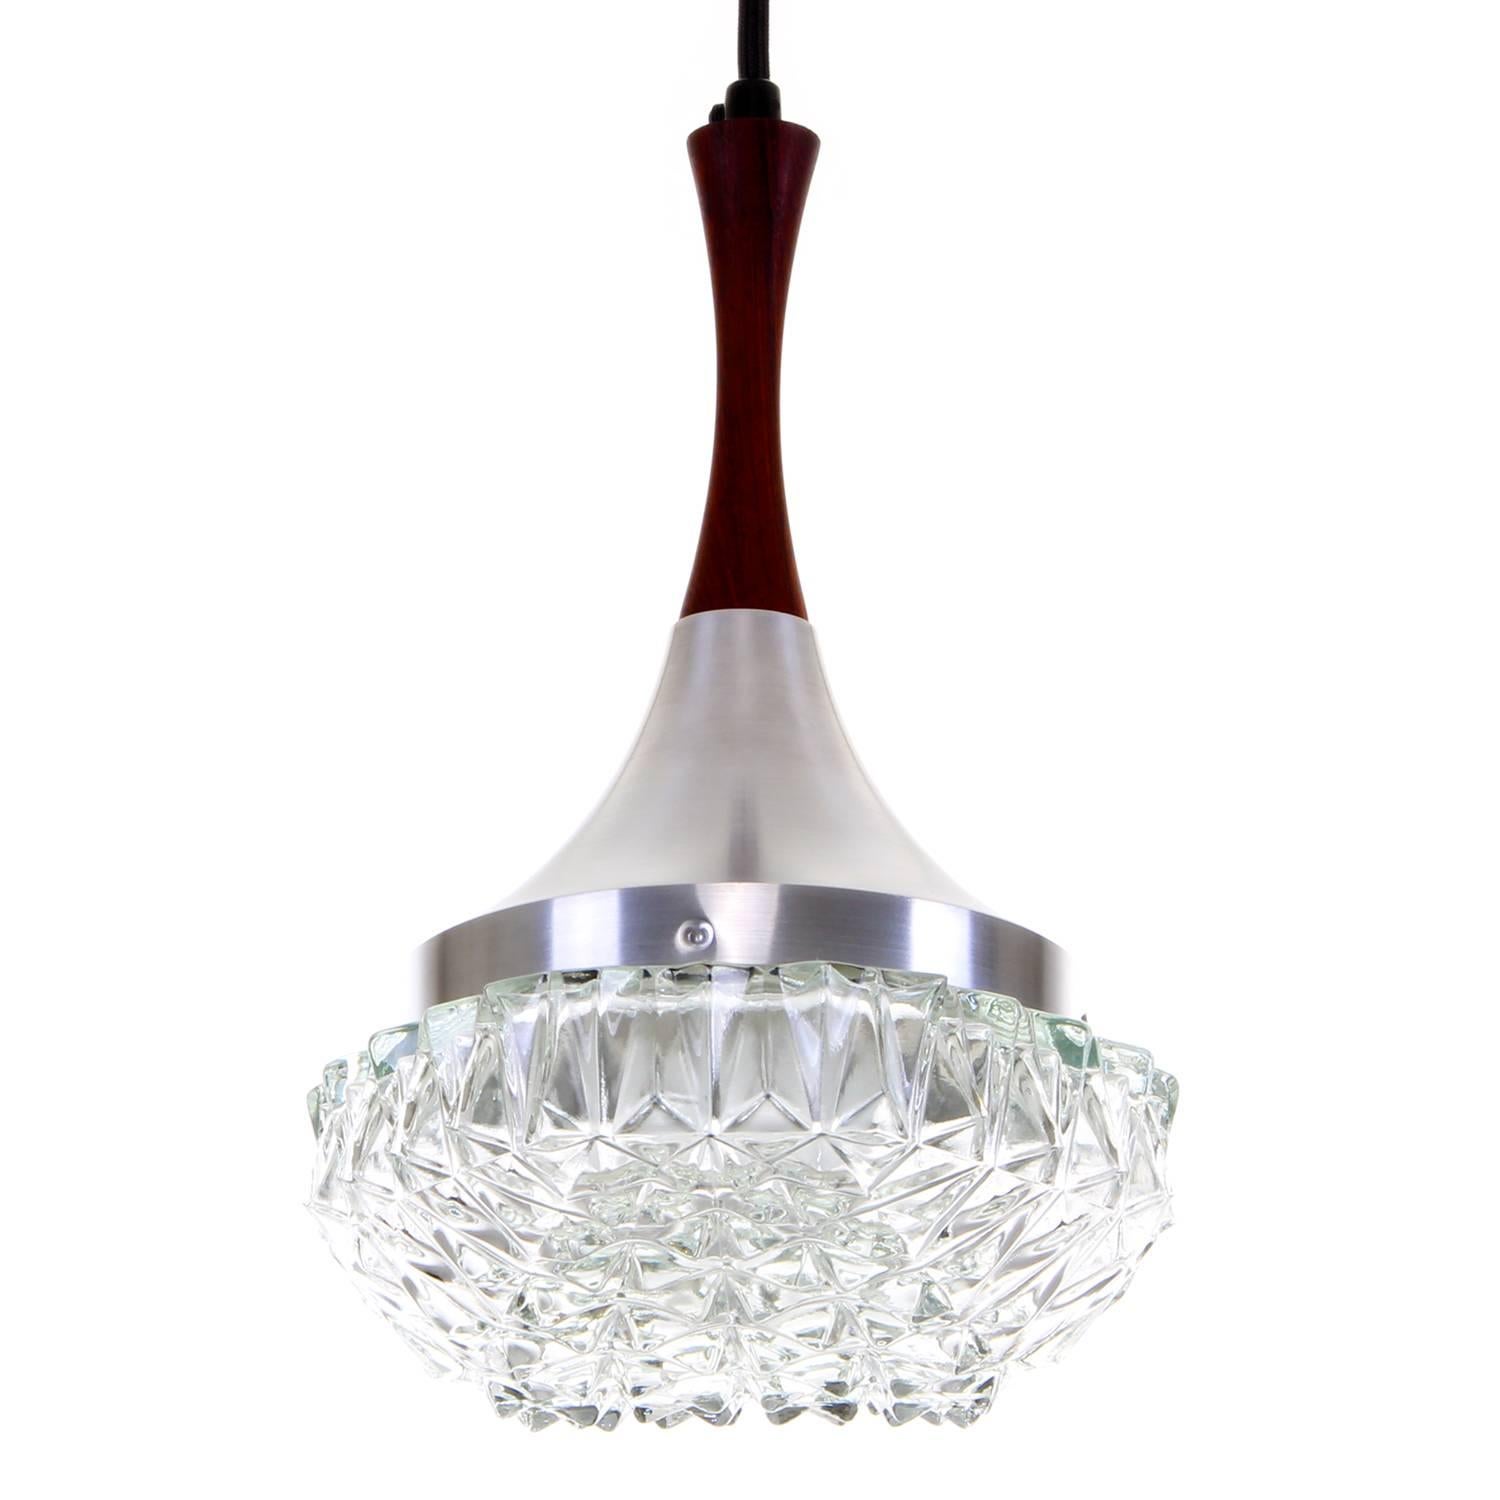 Mid-Century Modern Glass with Rosewood Pendant Light, circa 1960s Pressed Glass Hanging Lamp